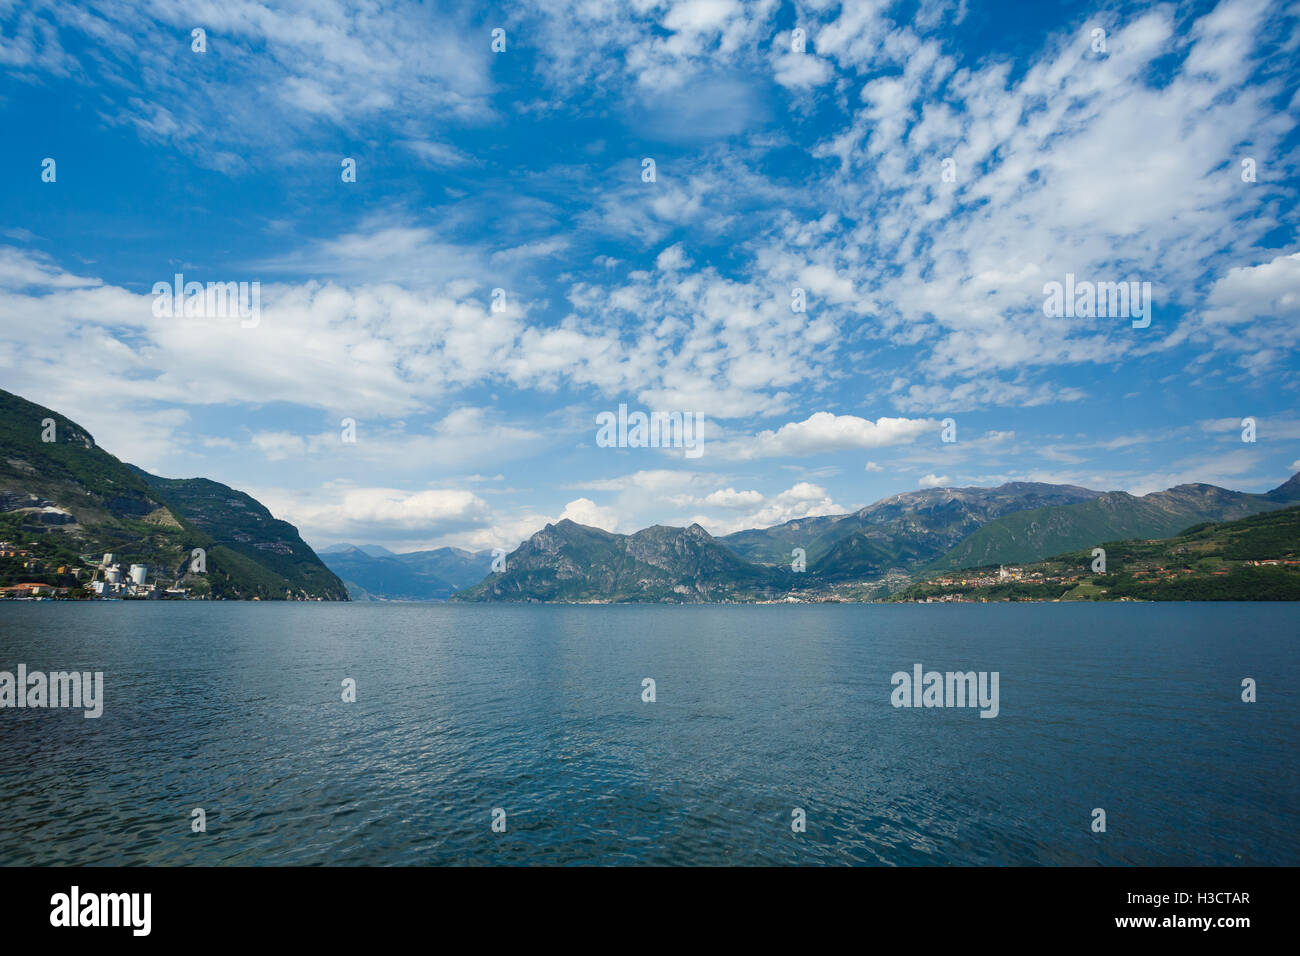 Landscape of Lake Iseo in North Italy Stock Photo